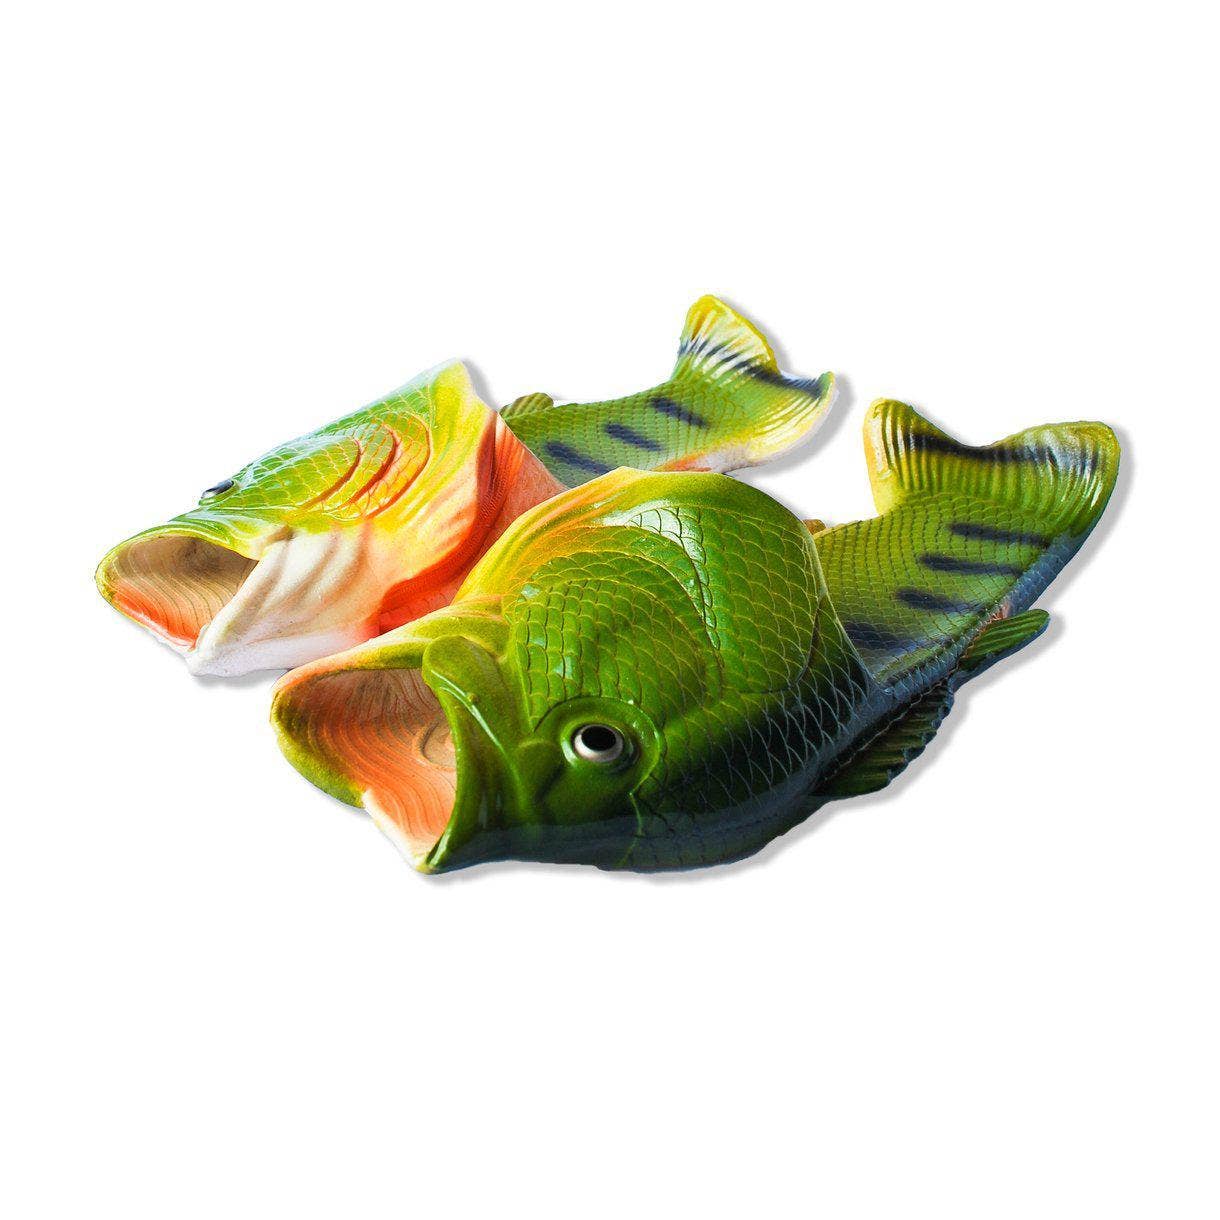 yellow/green, orange, white and black fish slippers --- slide slippers in the shape and texture of a fish, mouth of fish is the opening for the toes